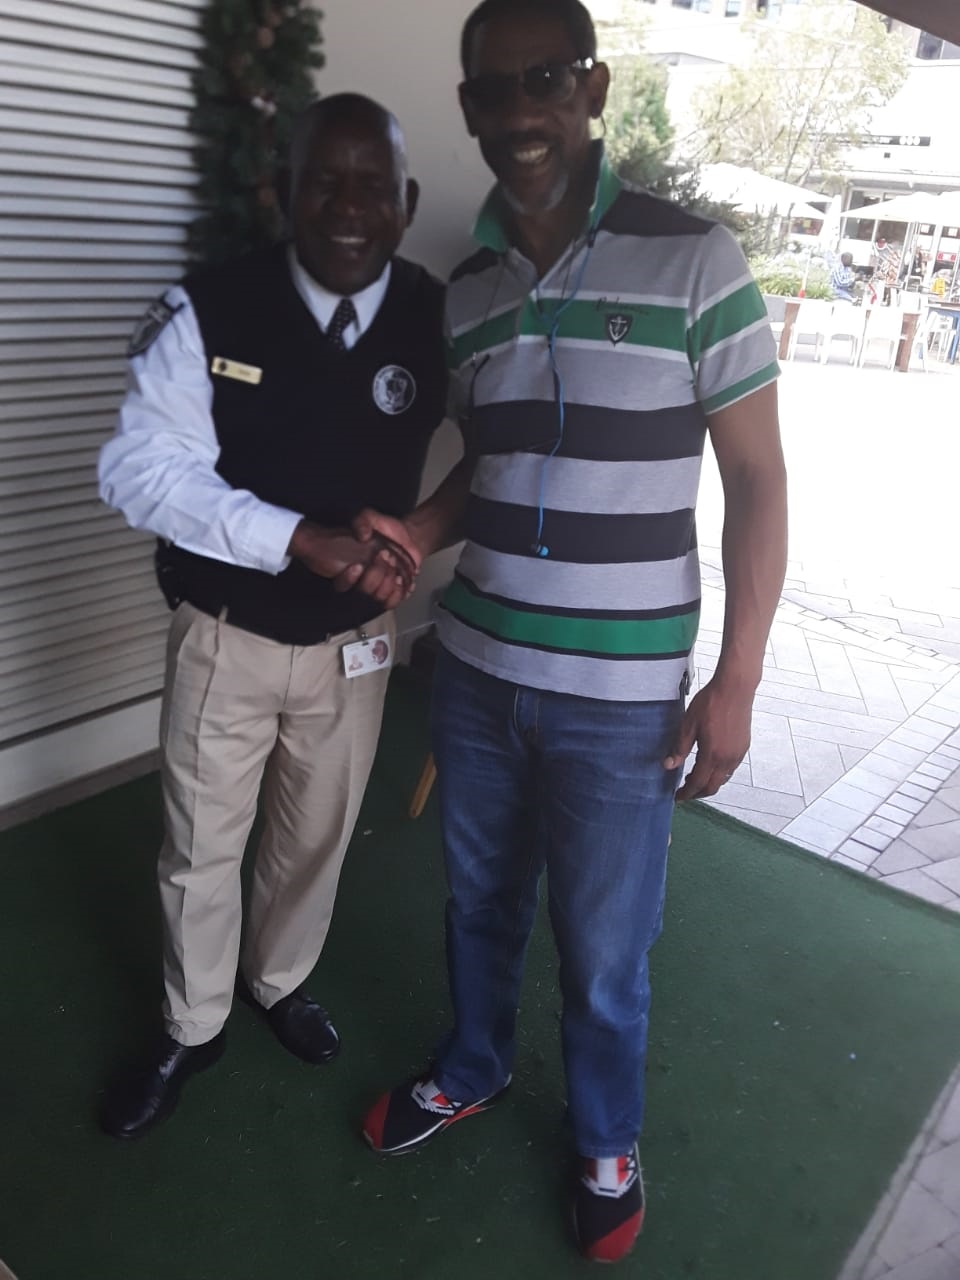 Happy times: Amos Masombuka taking a picture with actor Luthuli Dlamini before the actor disappeared with his phone. 